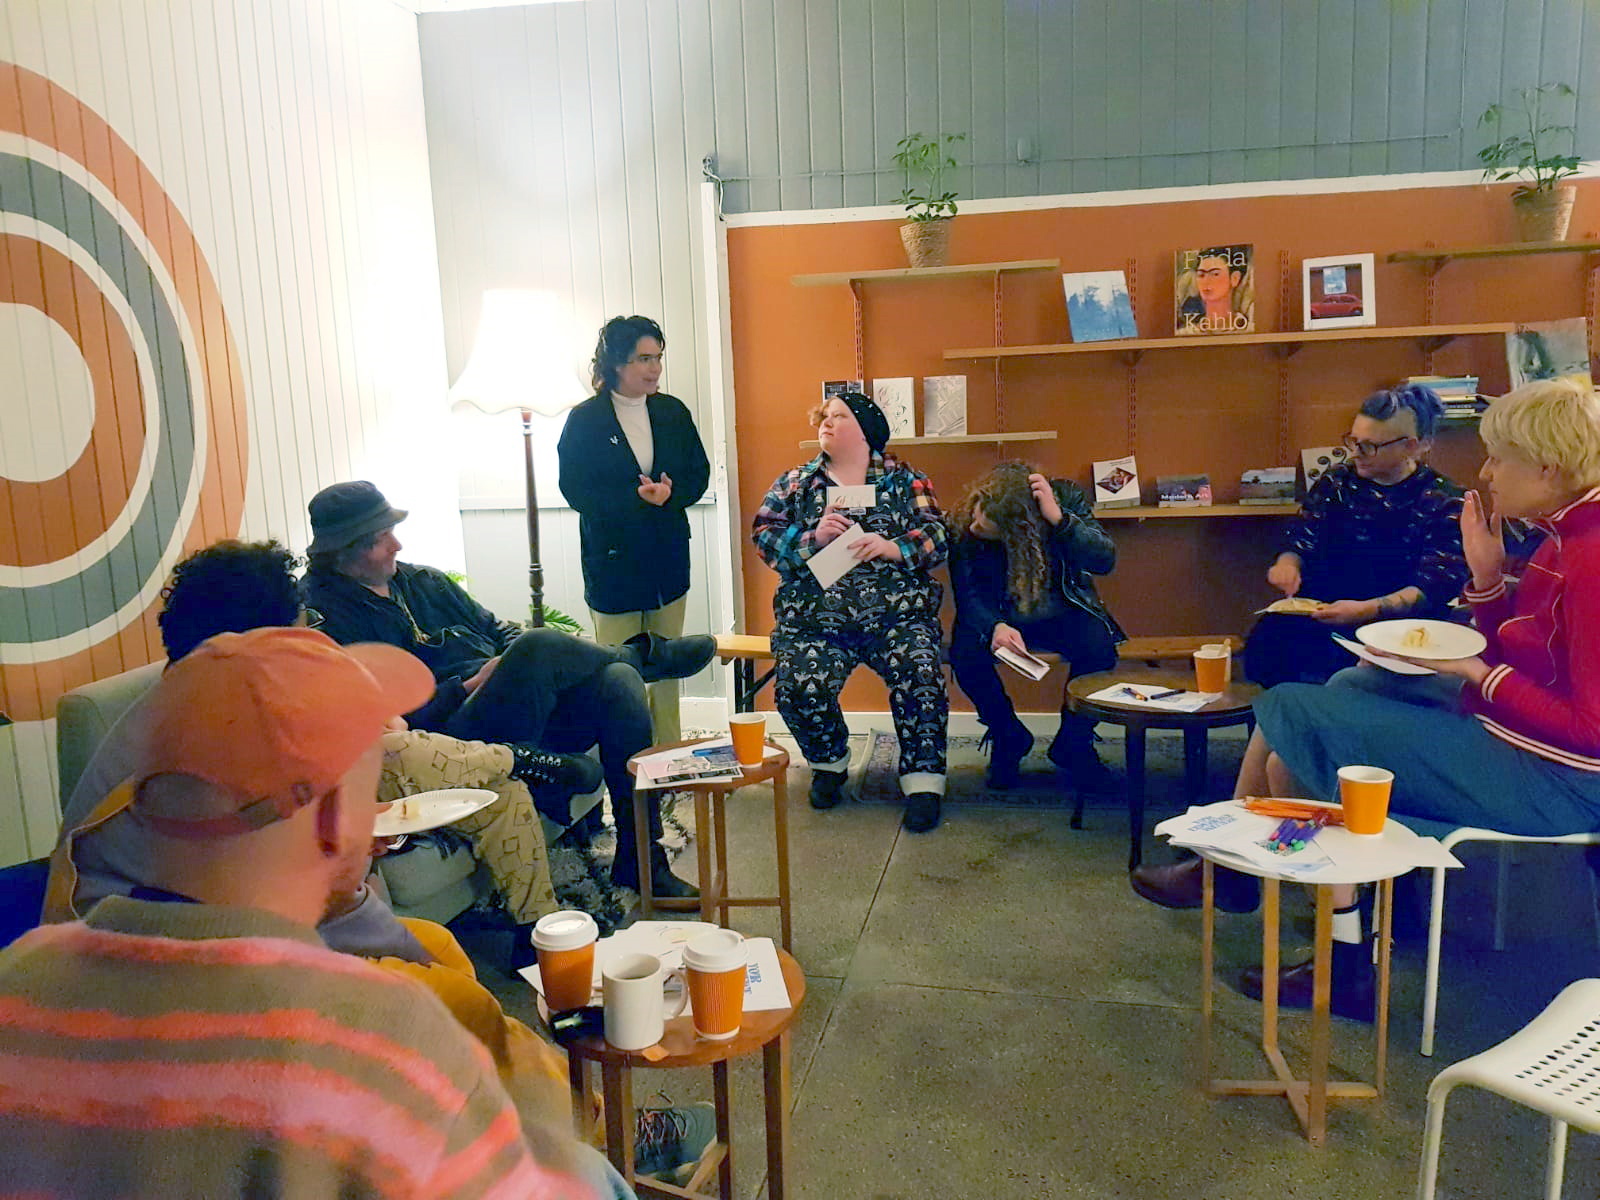 Photo of a brightly painted bookshop with various mismatched chairs and side tables. Dre Spisto is standing in one corner speaking to the attendees, who are sitting to their right, while the three zine artists are sitting to their left.